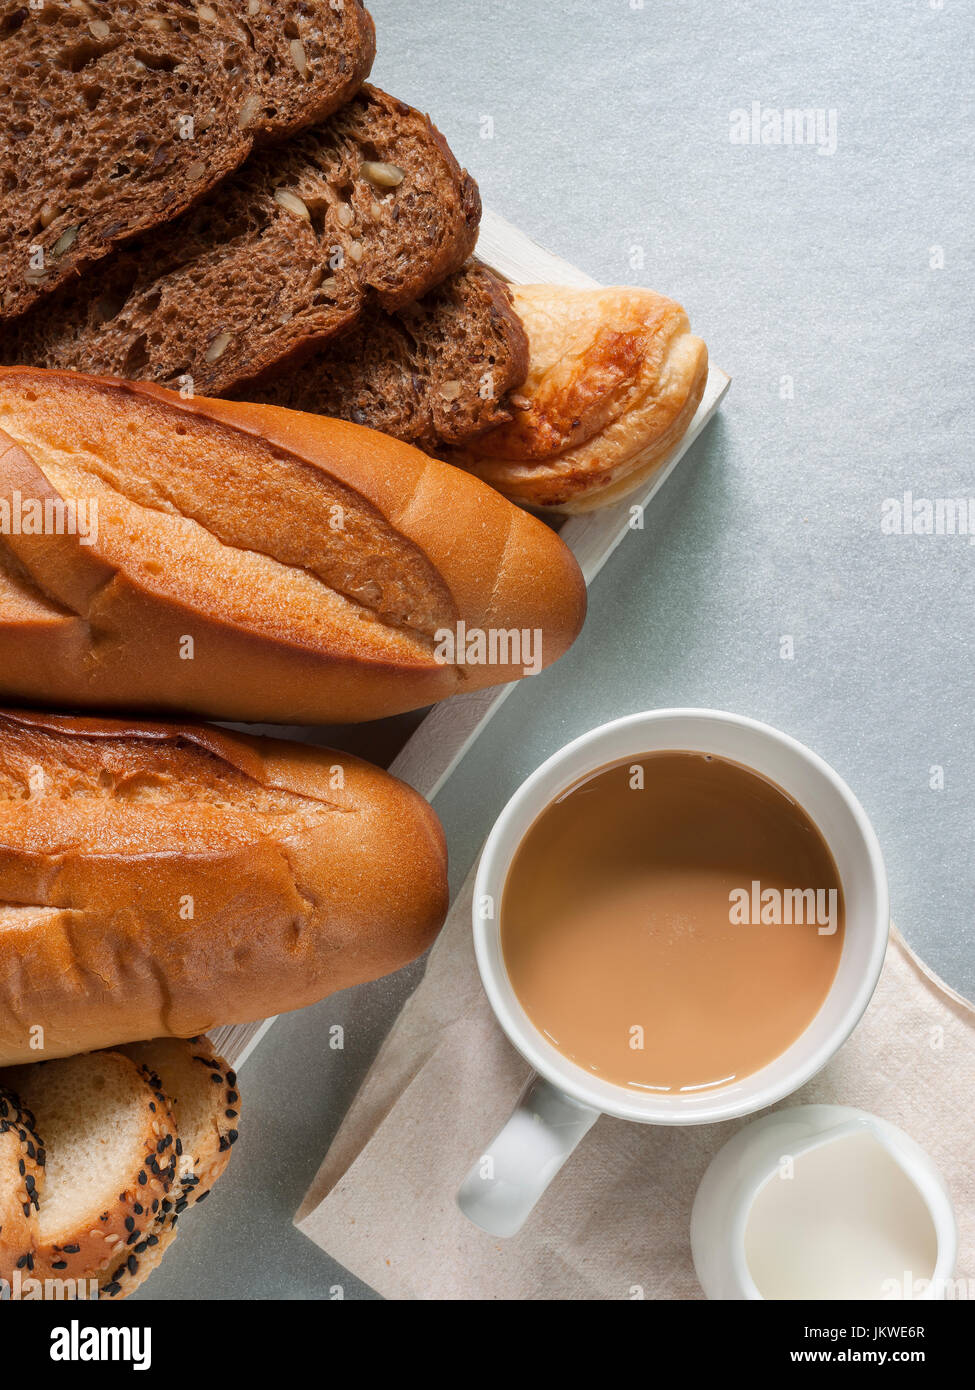 bakery cereal bread home made fresh for everyday breakfast or coffee time healthy life style food Stock Photo